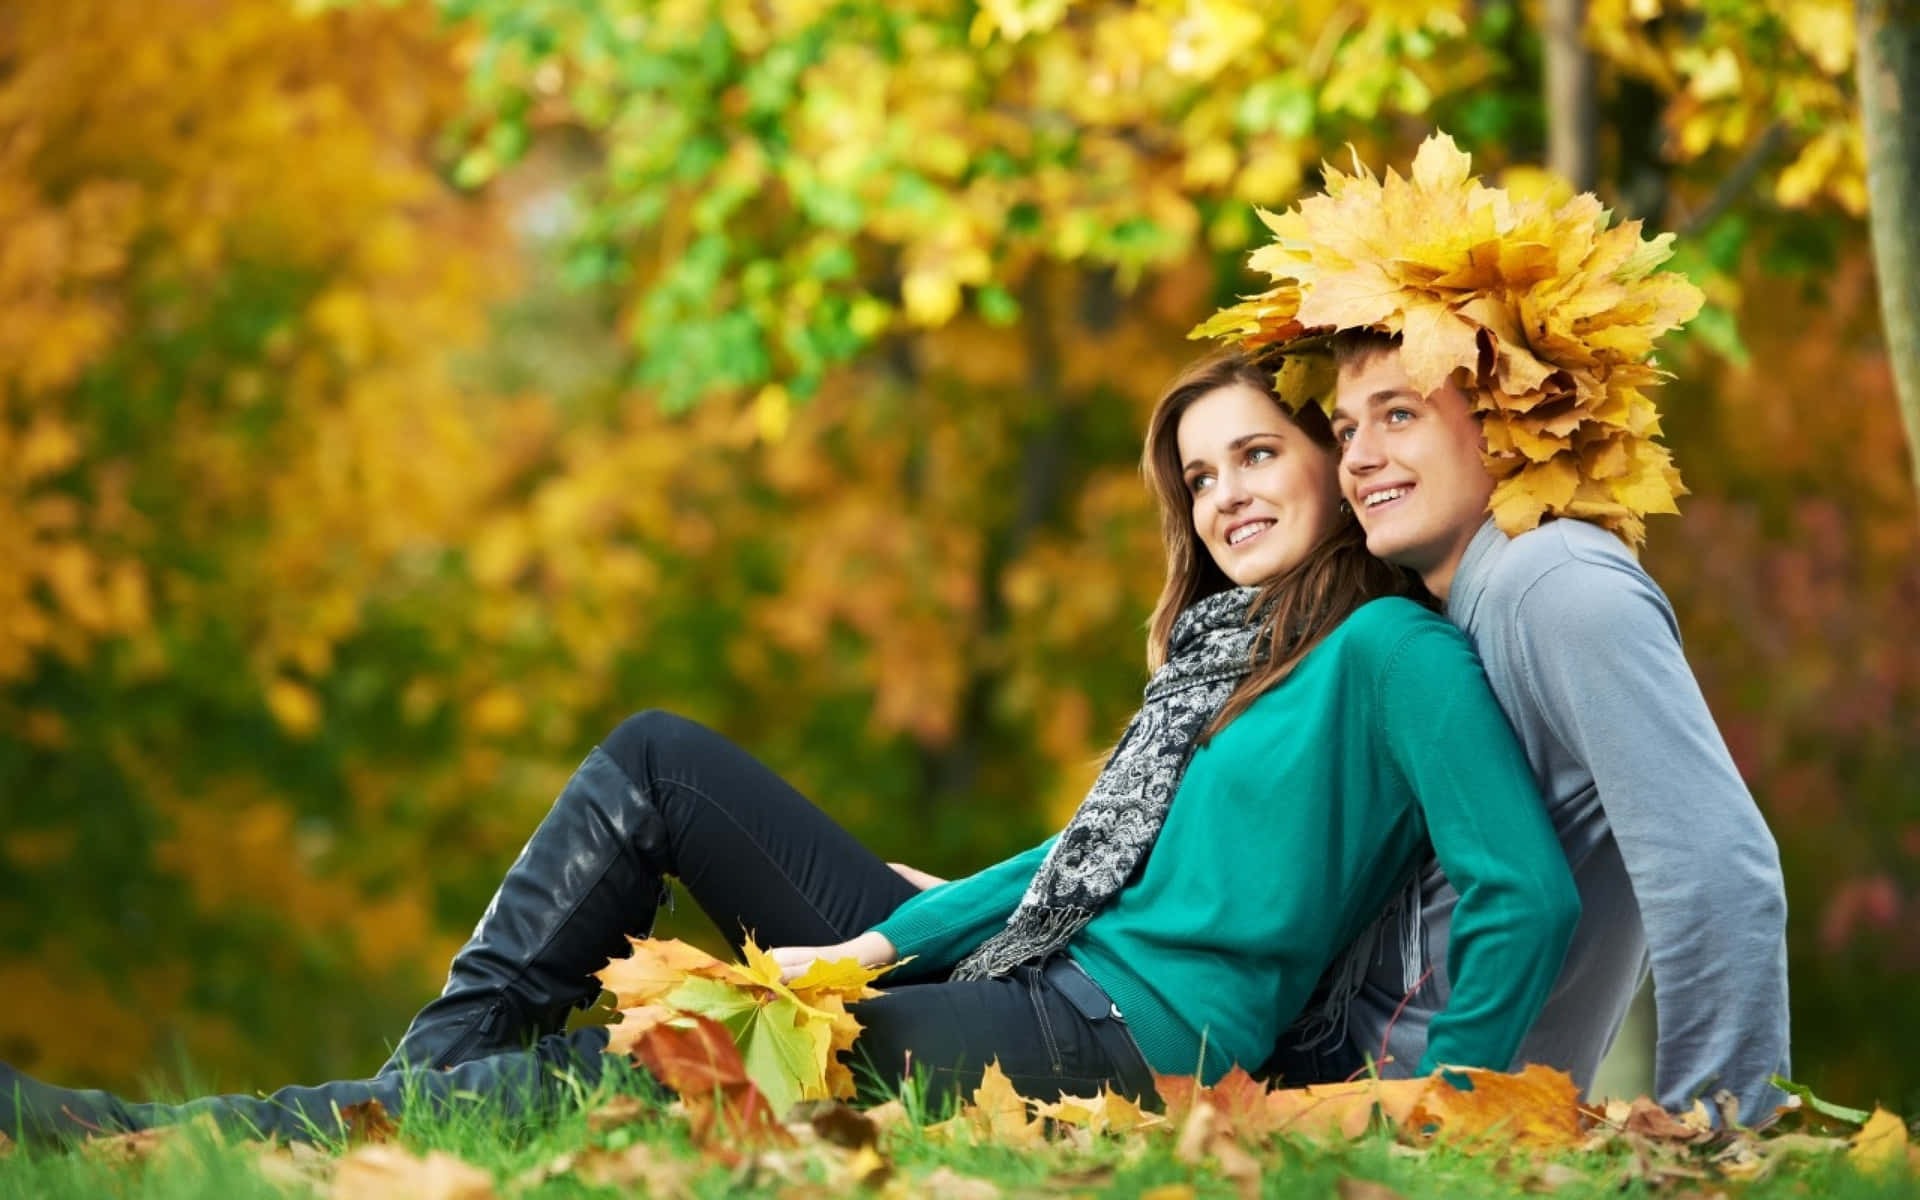 Couple Romance With Autumn Leaves Picture